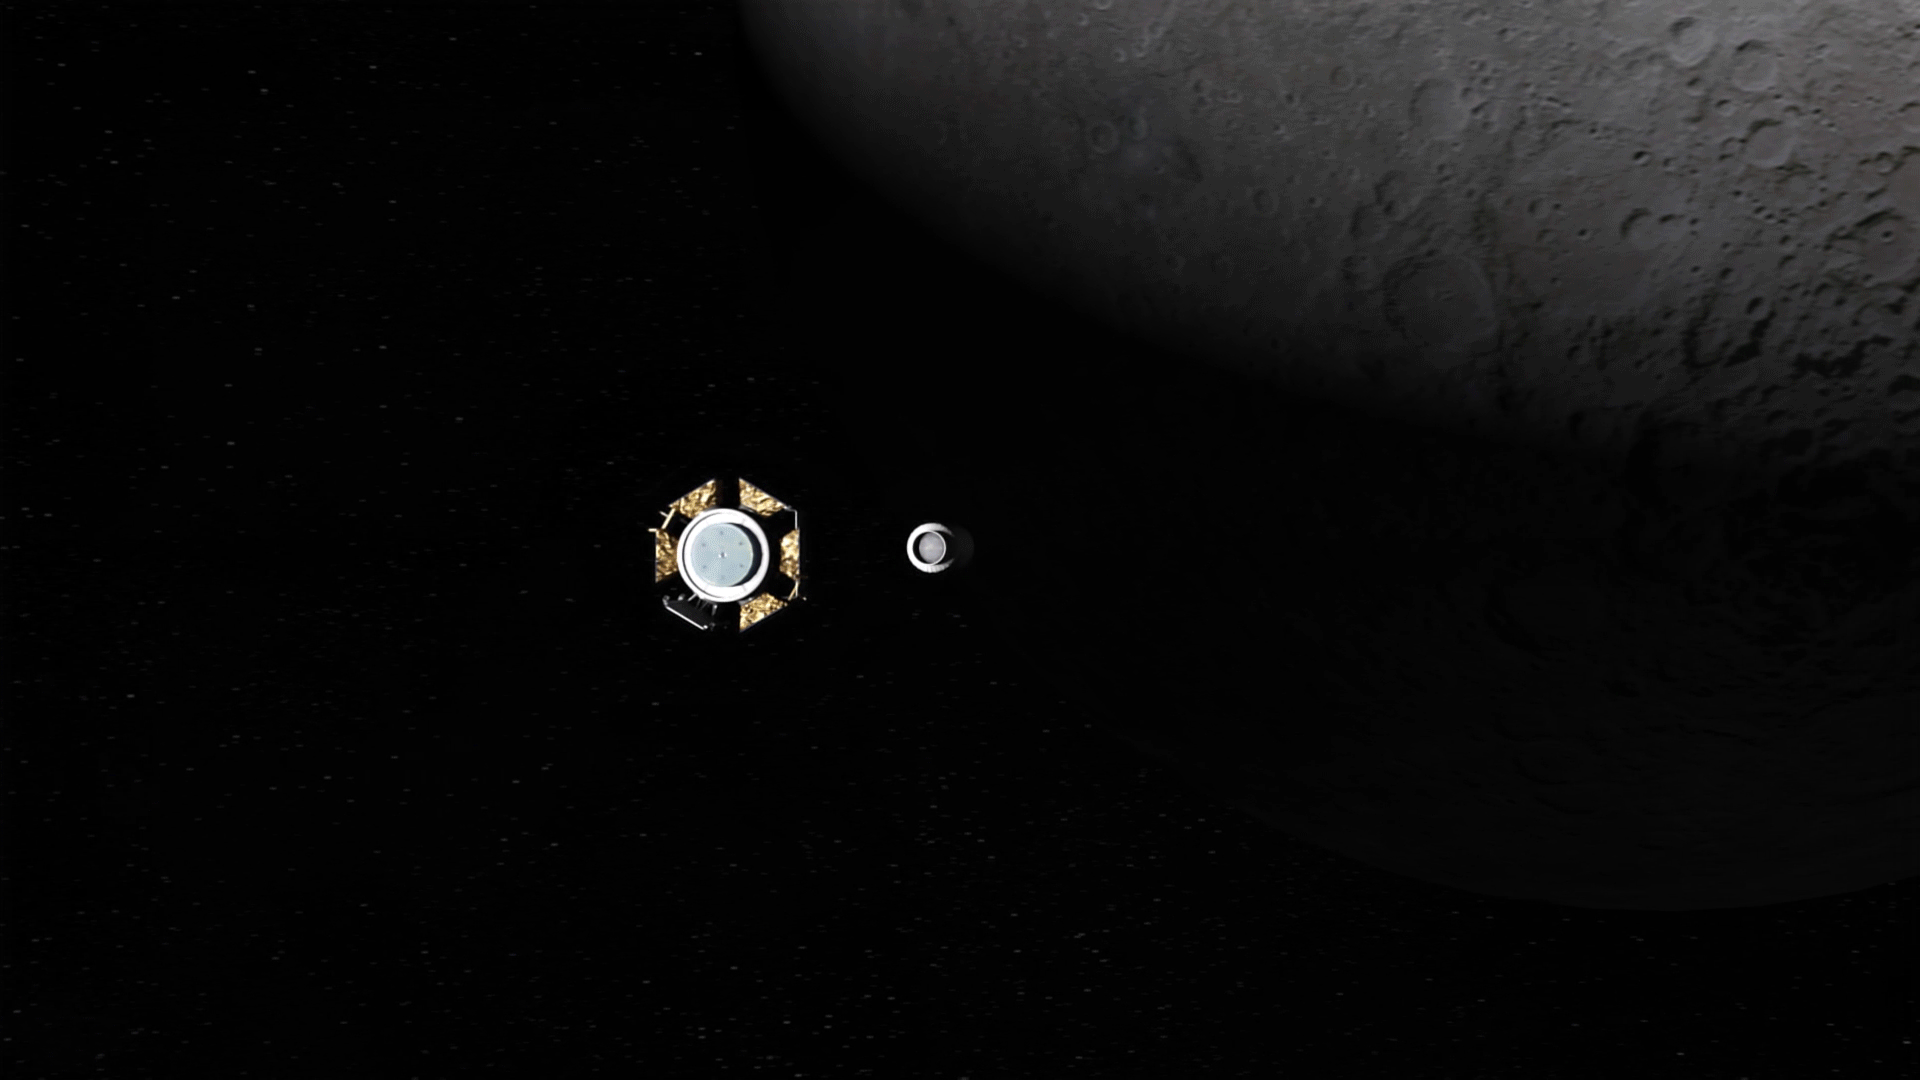 Animation of the LCROSS mission impacting the Moon